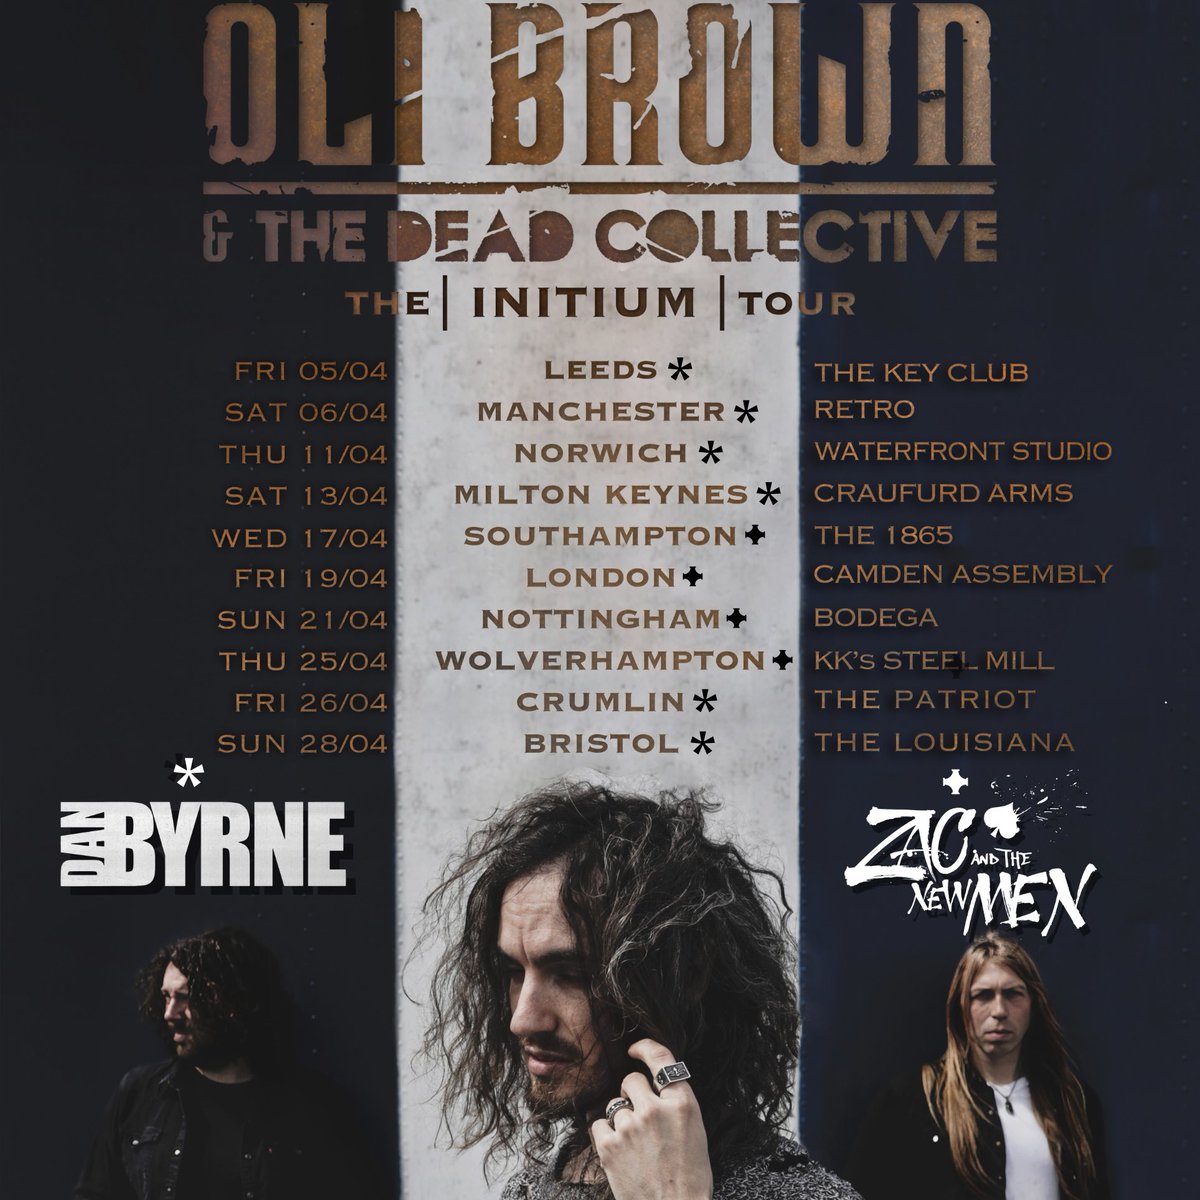 So stoked to announce the legendary @danbyrne_ will be joining us as support for the Initium Tour along with the killer @zacandthenewmen. We’re making this as brutally atmospheric and epic as possible, so having these two killer acts join us is perfect. andthedeadcollective.com/tour